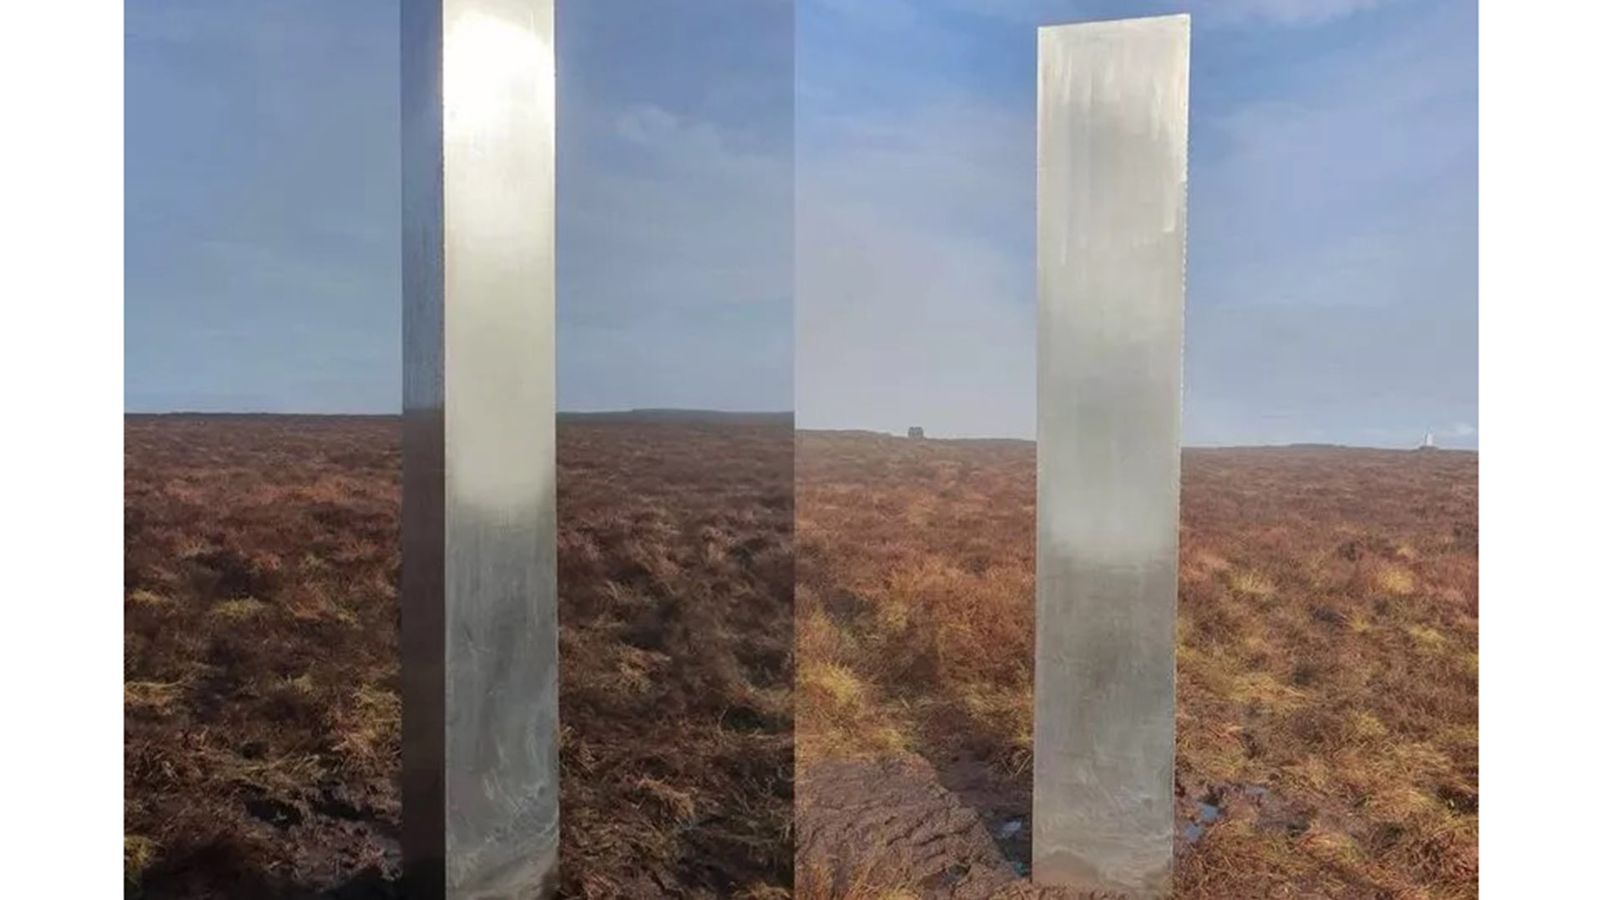 Mysterious monolith appears on hillside in Wales - prompting alien conspiracy theories